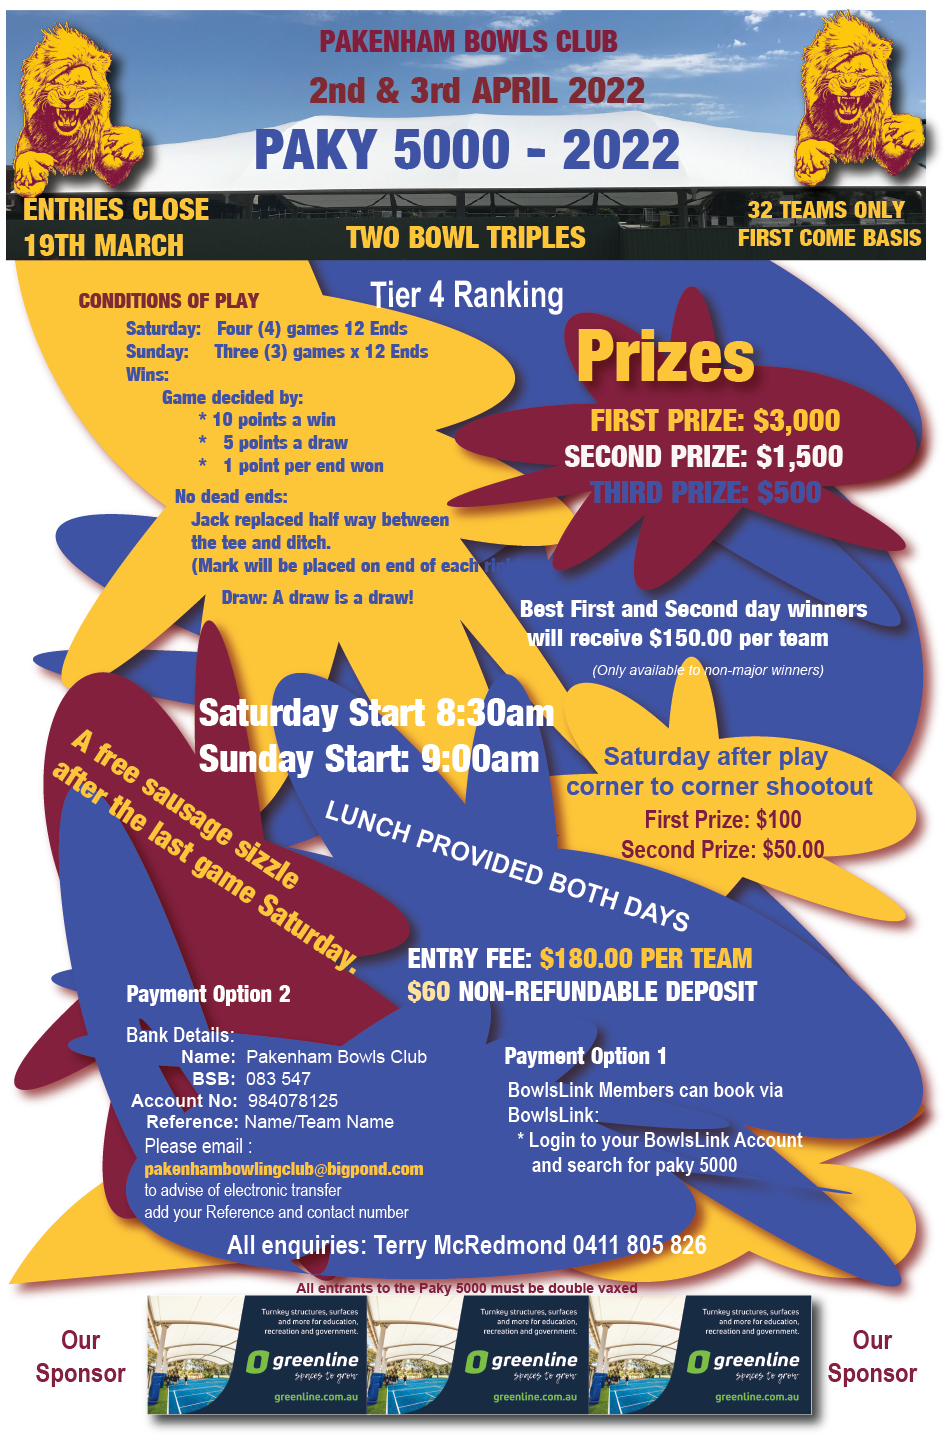 Paky 5000 Entries Close 19th March Two Bowl Triples, first 32 teams contact Terry McRedmond for more information 0411805826